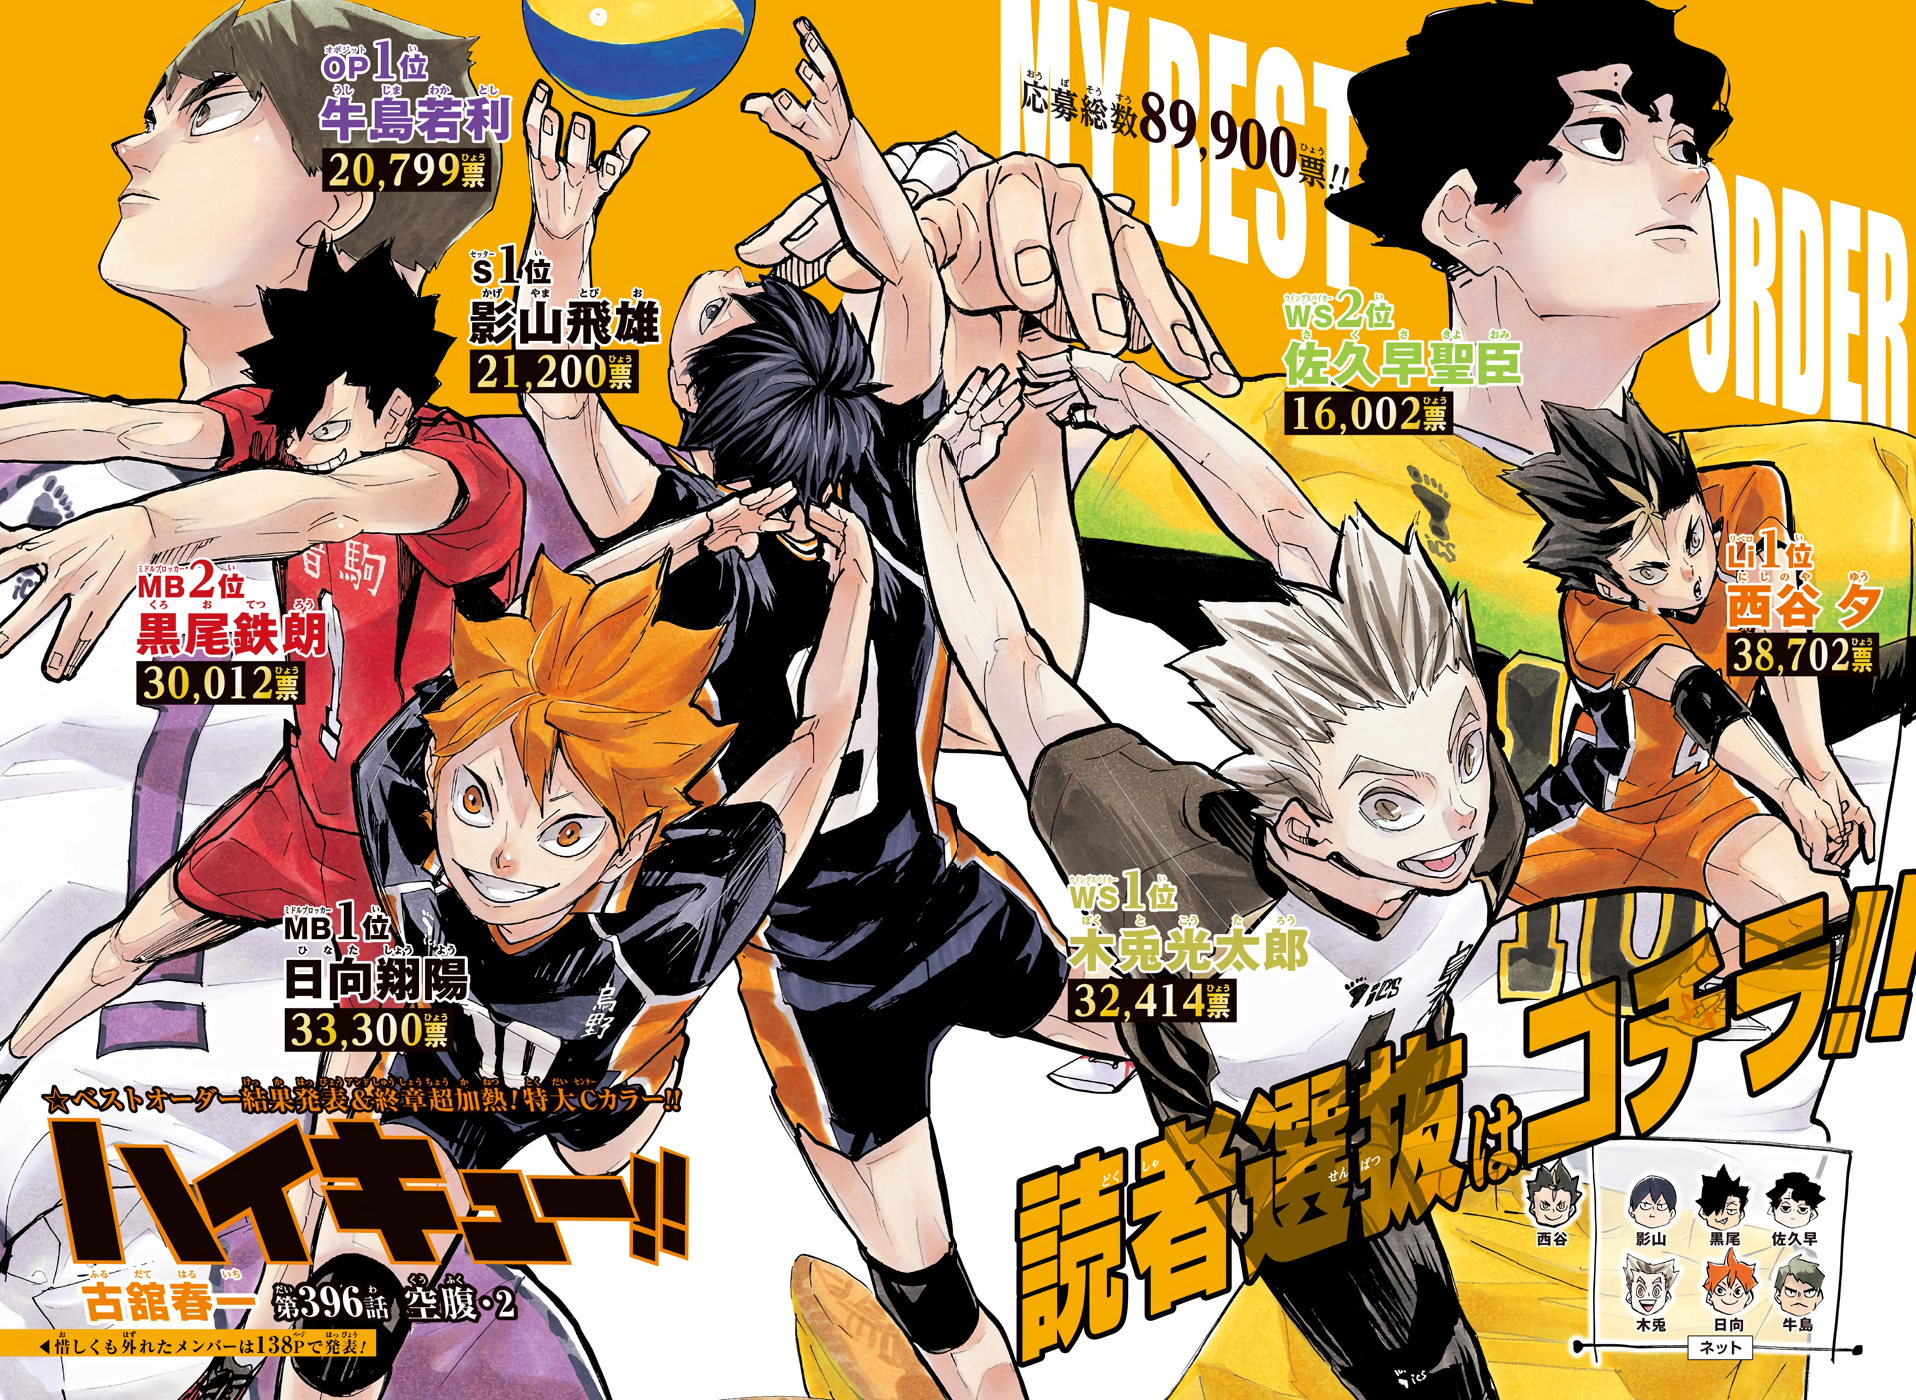 32% Of Haikyuu!! Fans Agree This Is Their Favorite Character